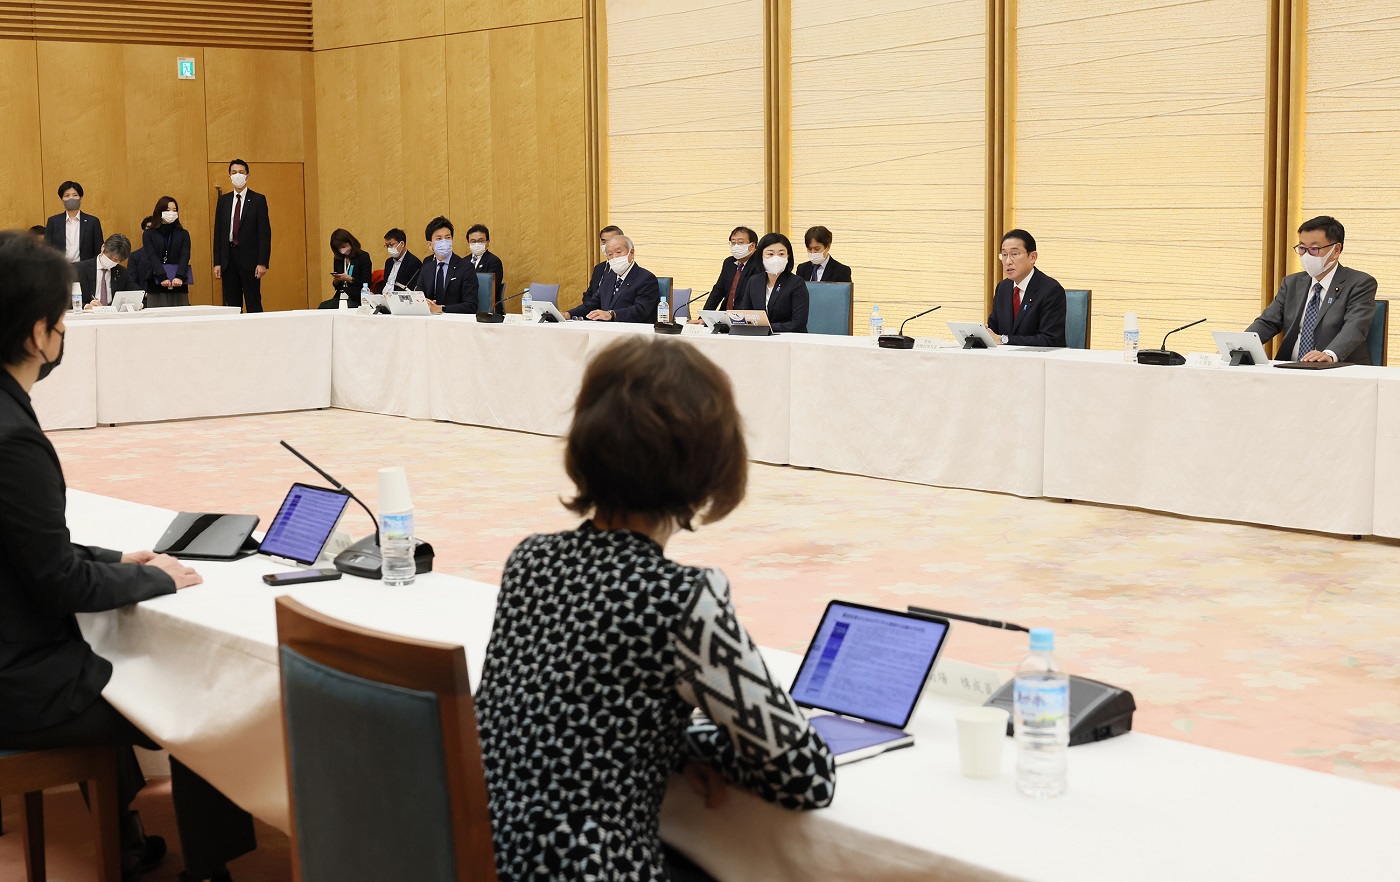 Photograph of the Prime Minister wrapping up a meeting (5